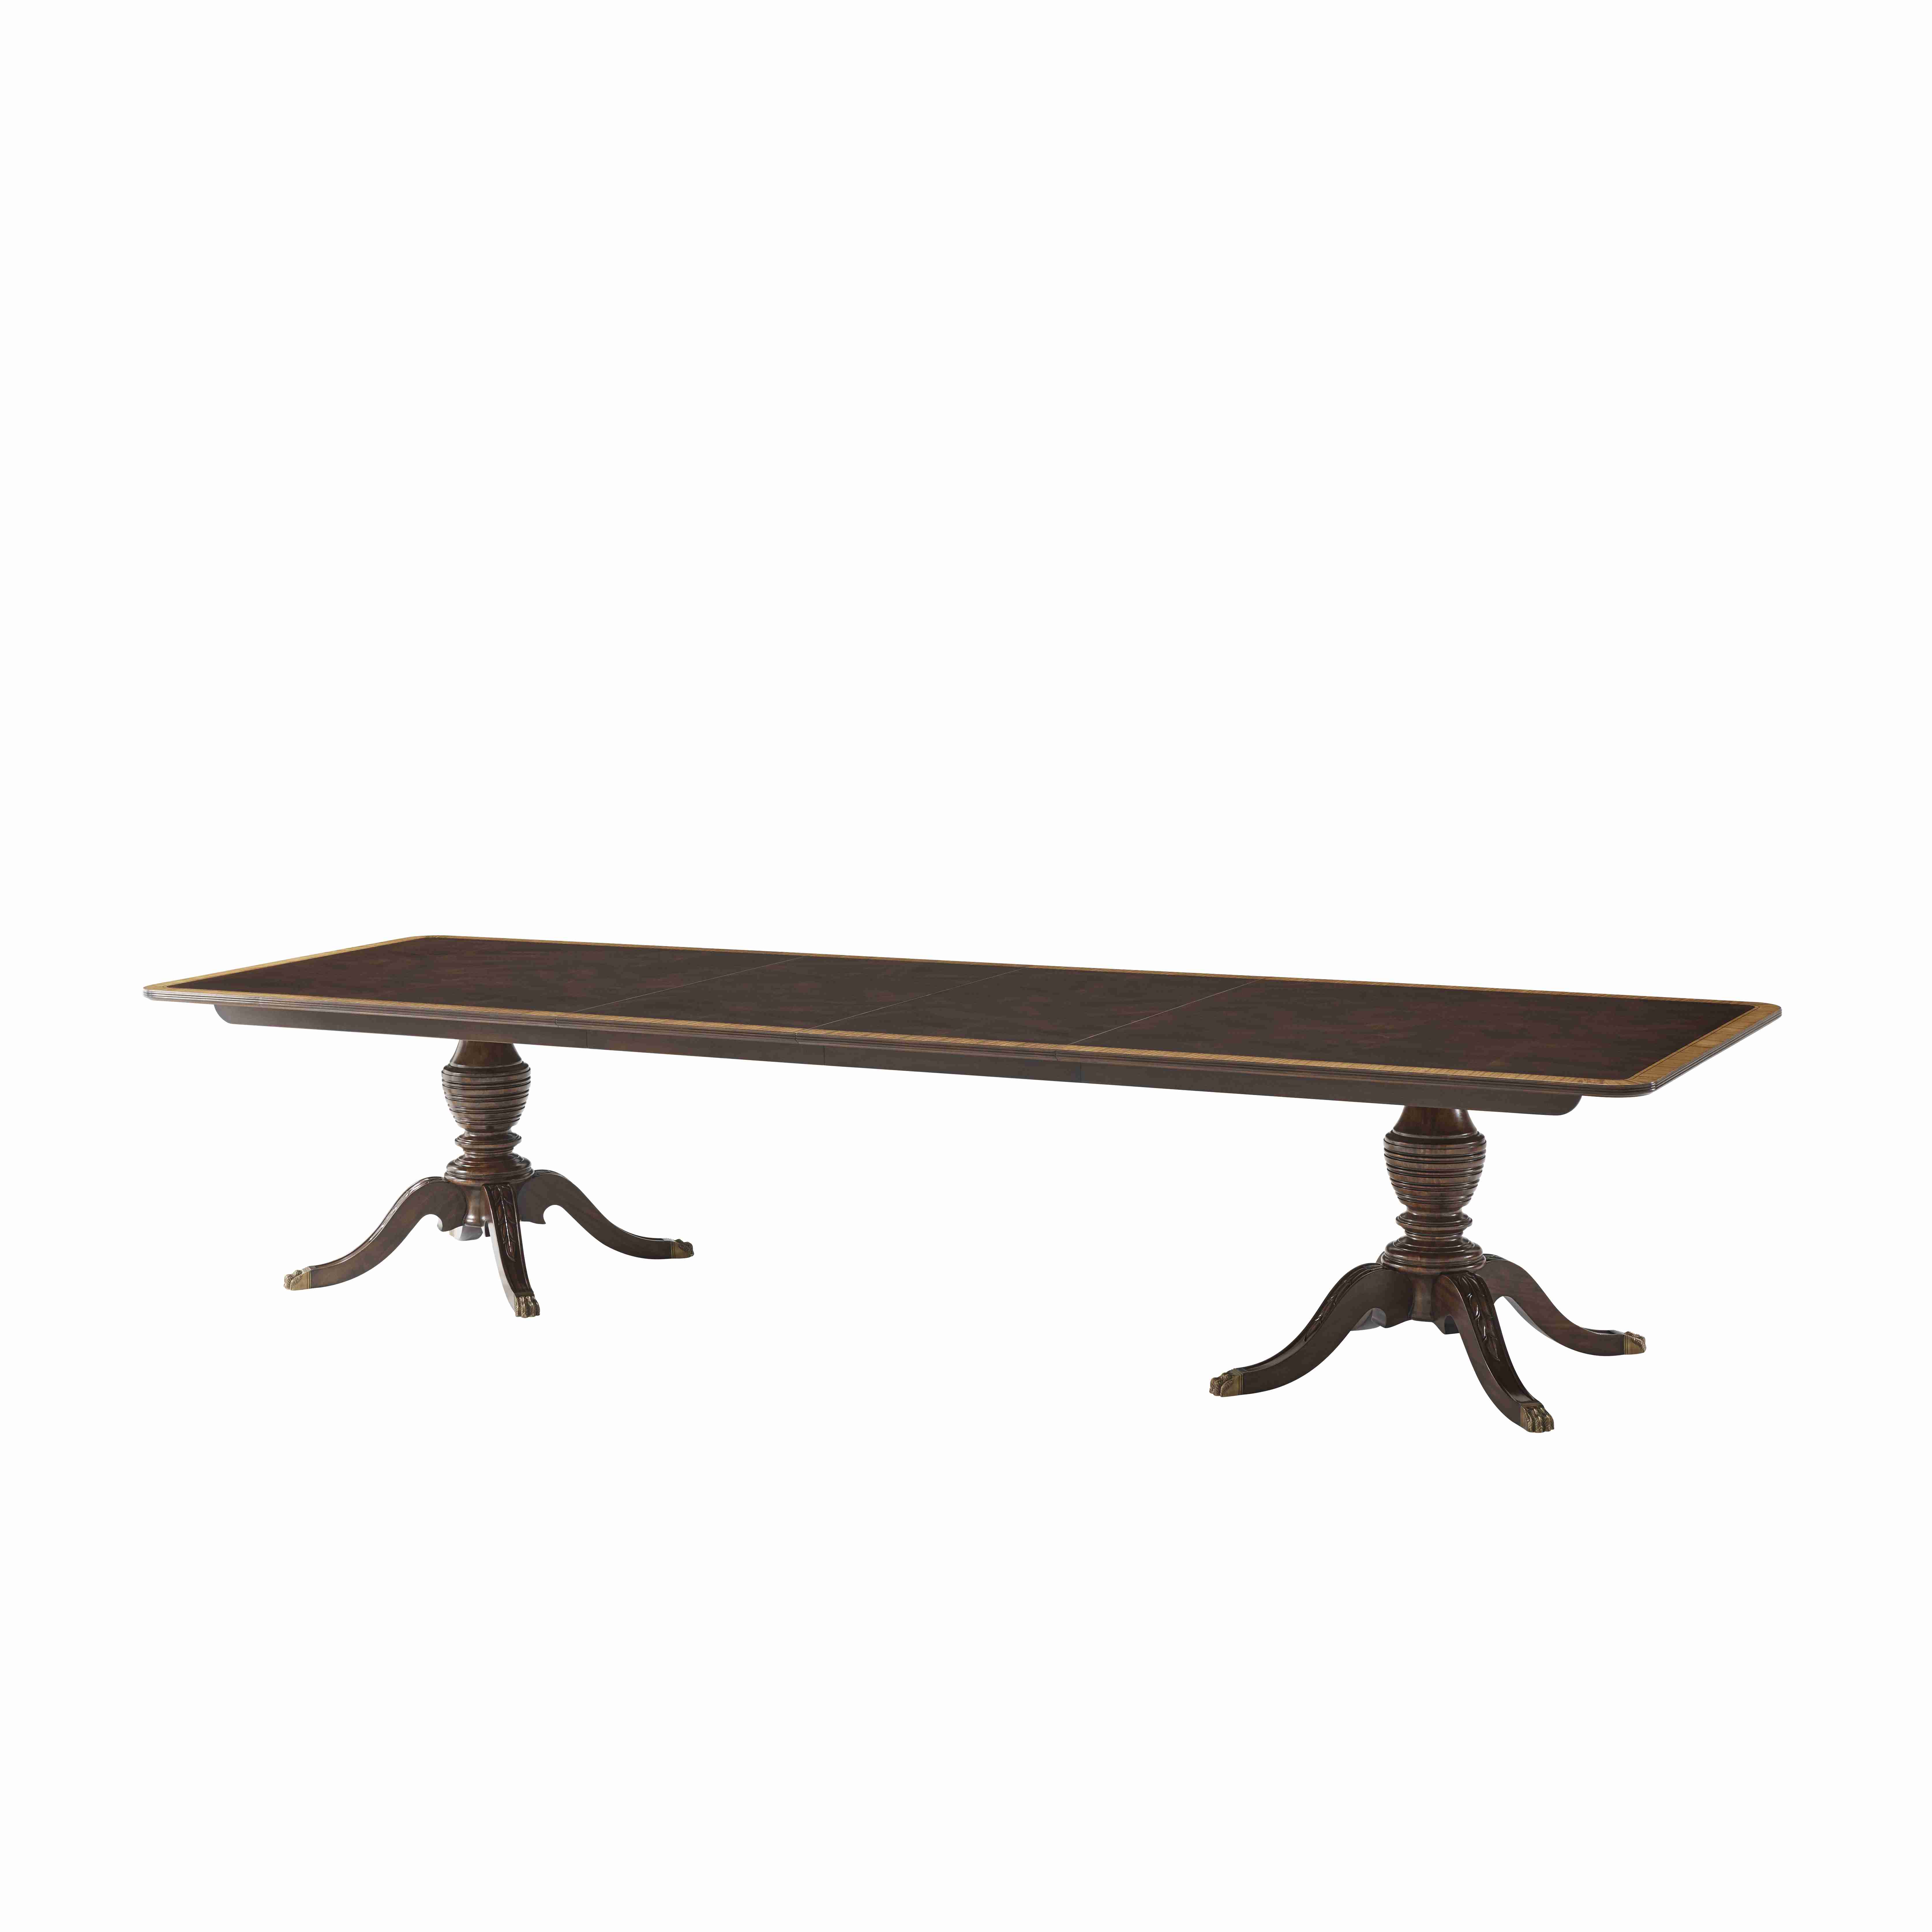 STATE DINING TABLE